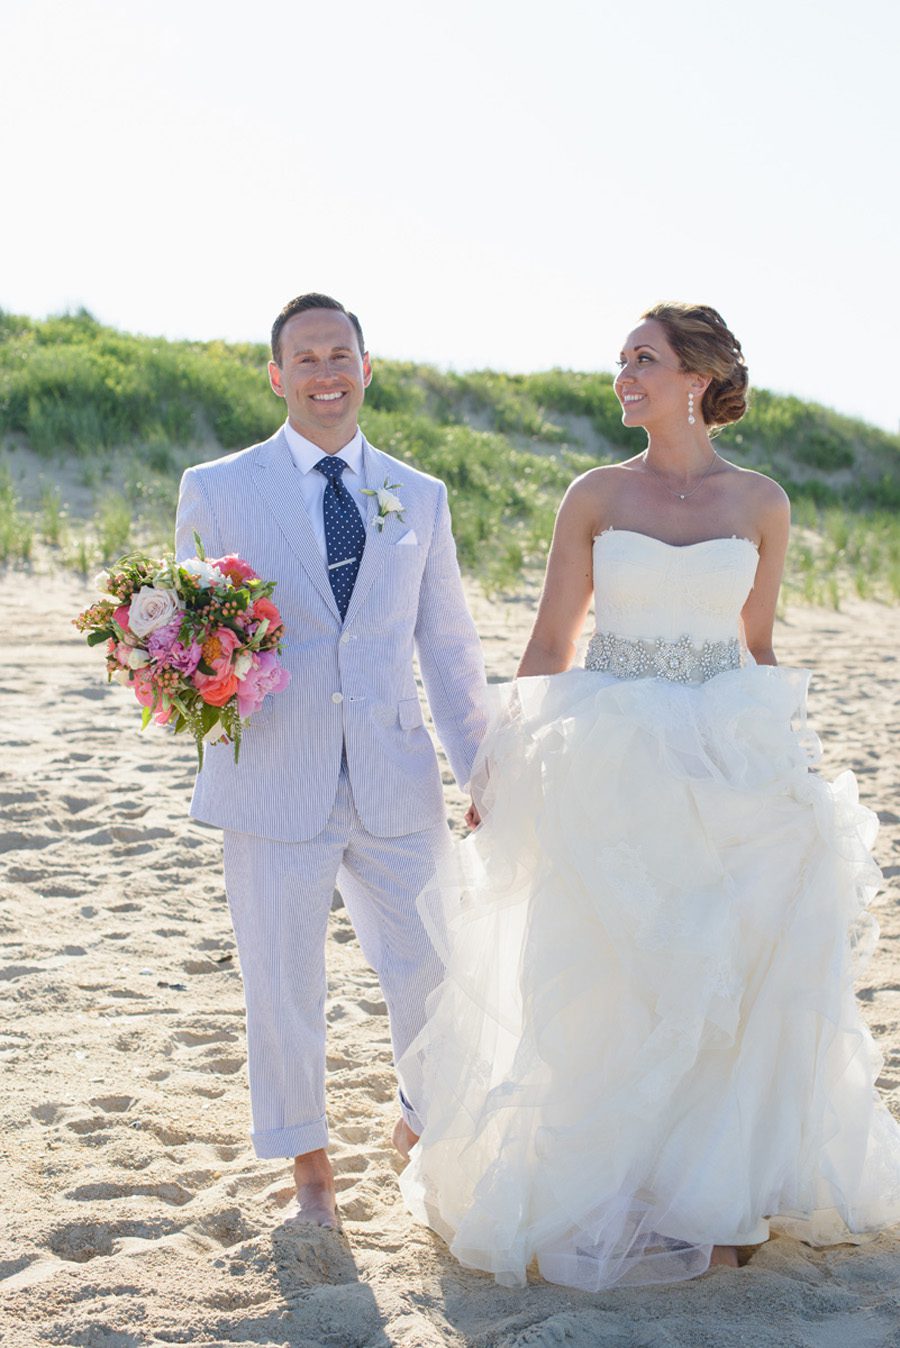 Jessica and Tom's Outer Banks wedding by Neil GT Photography Bride and Groom Smile